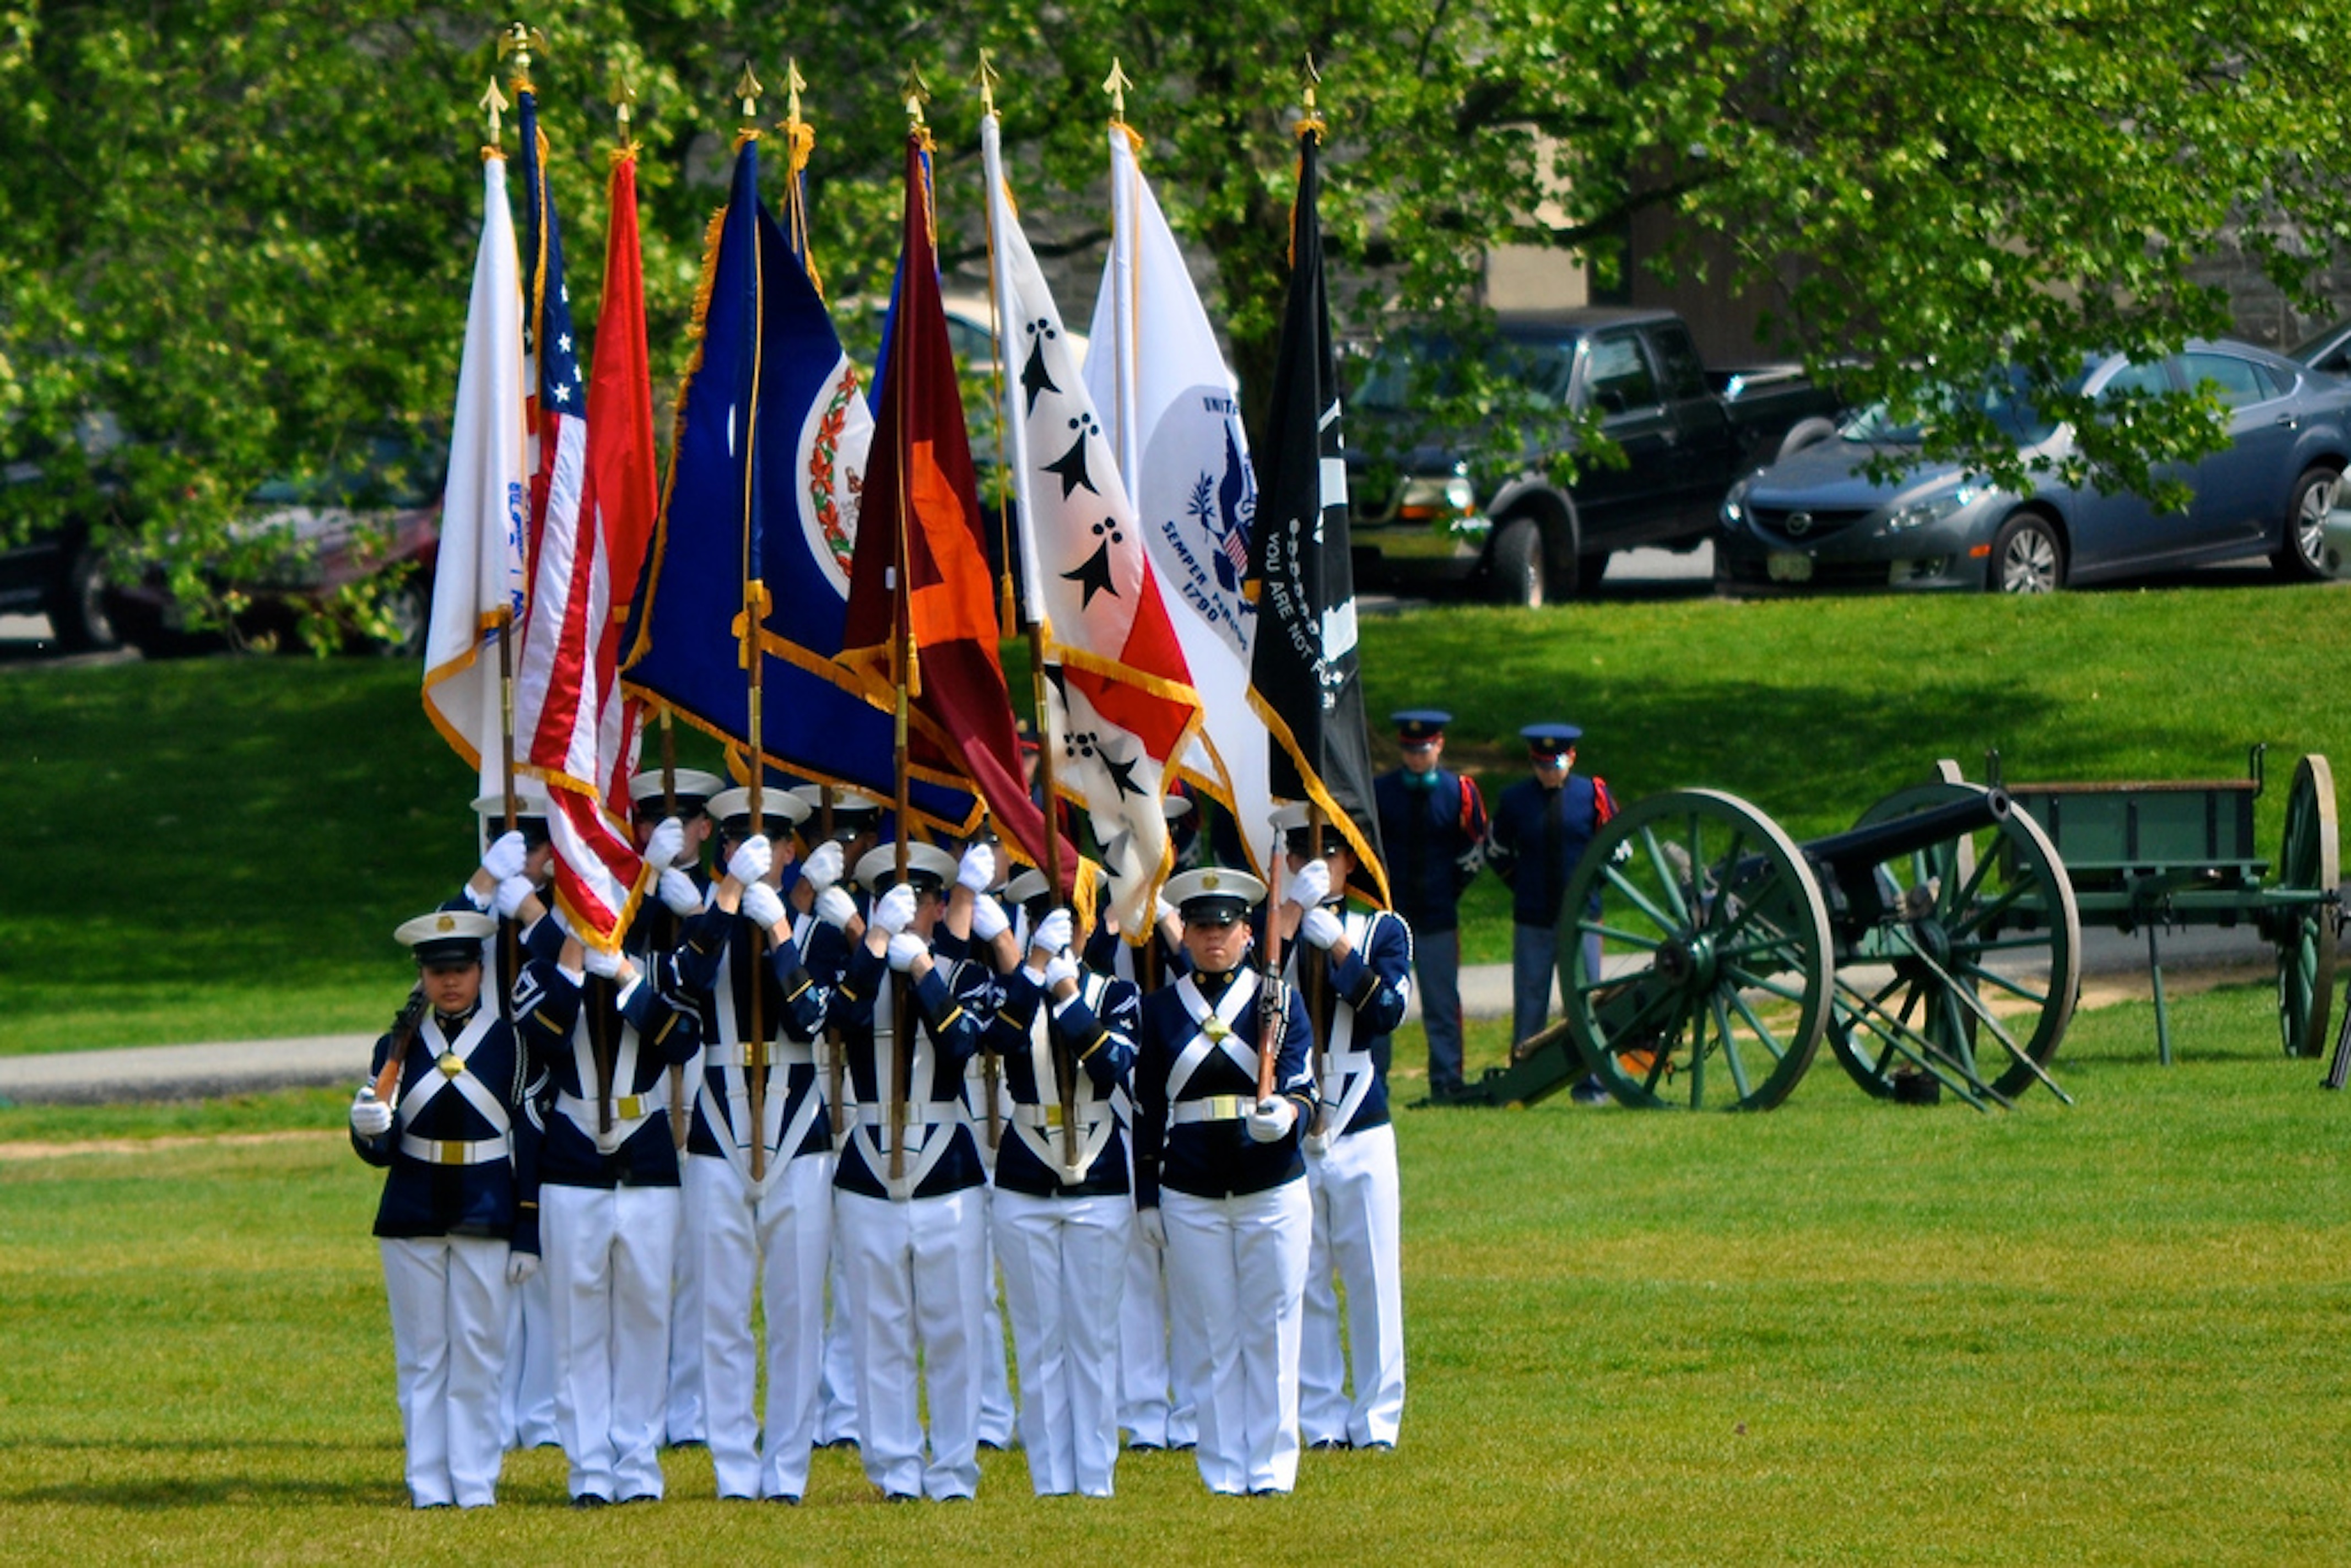 The Virginia Tech Corps of Cadets Color Guard and cannon, Skipper, prepare for the start of a parade on the Drillfield.